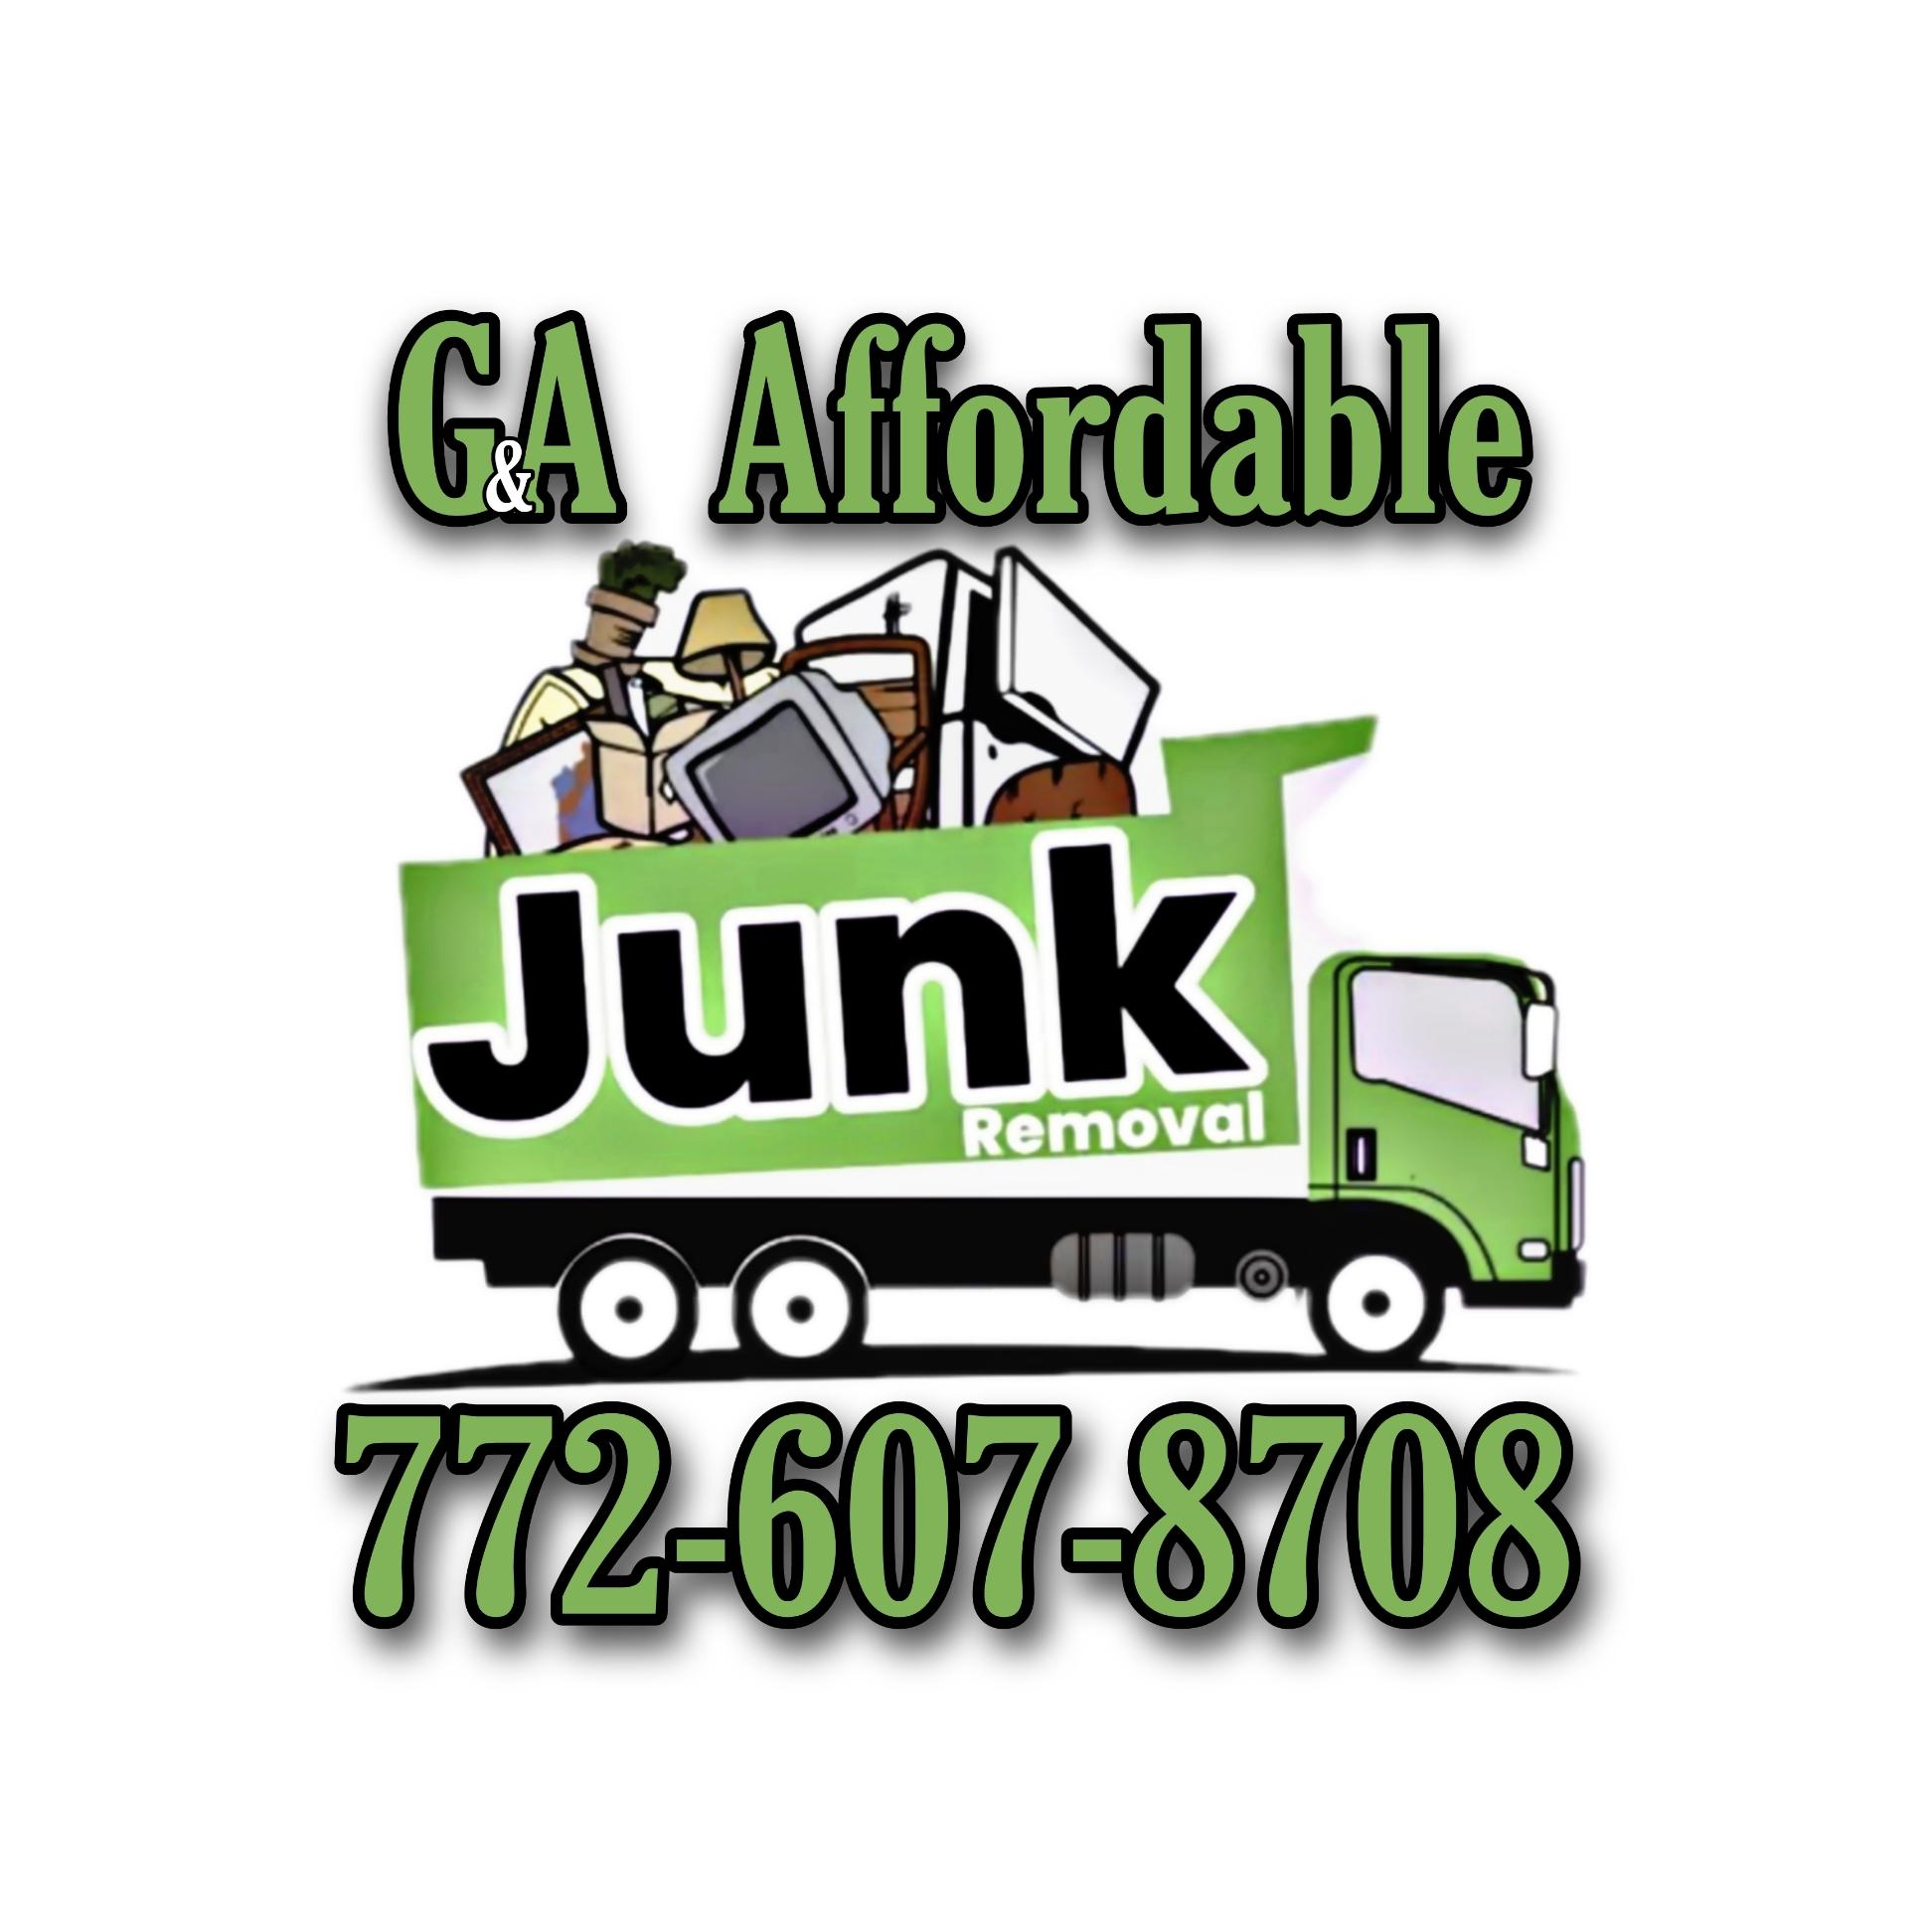 G&A Affordable Junk Removal Logo